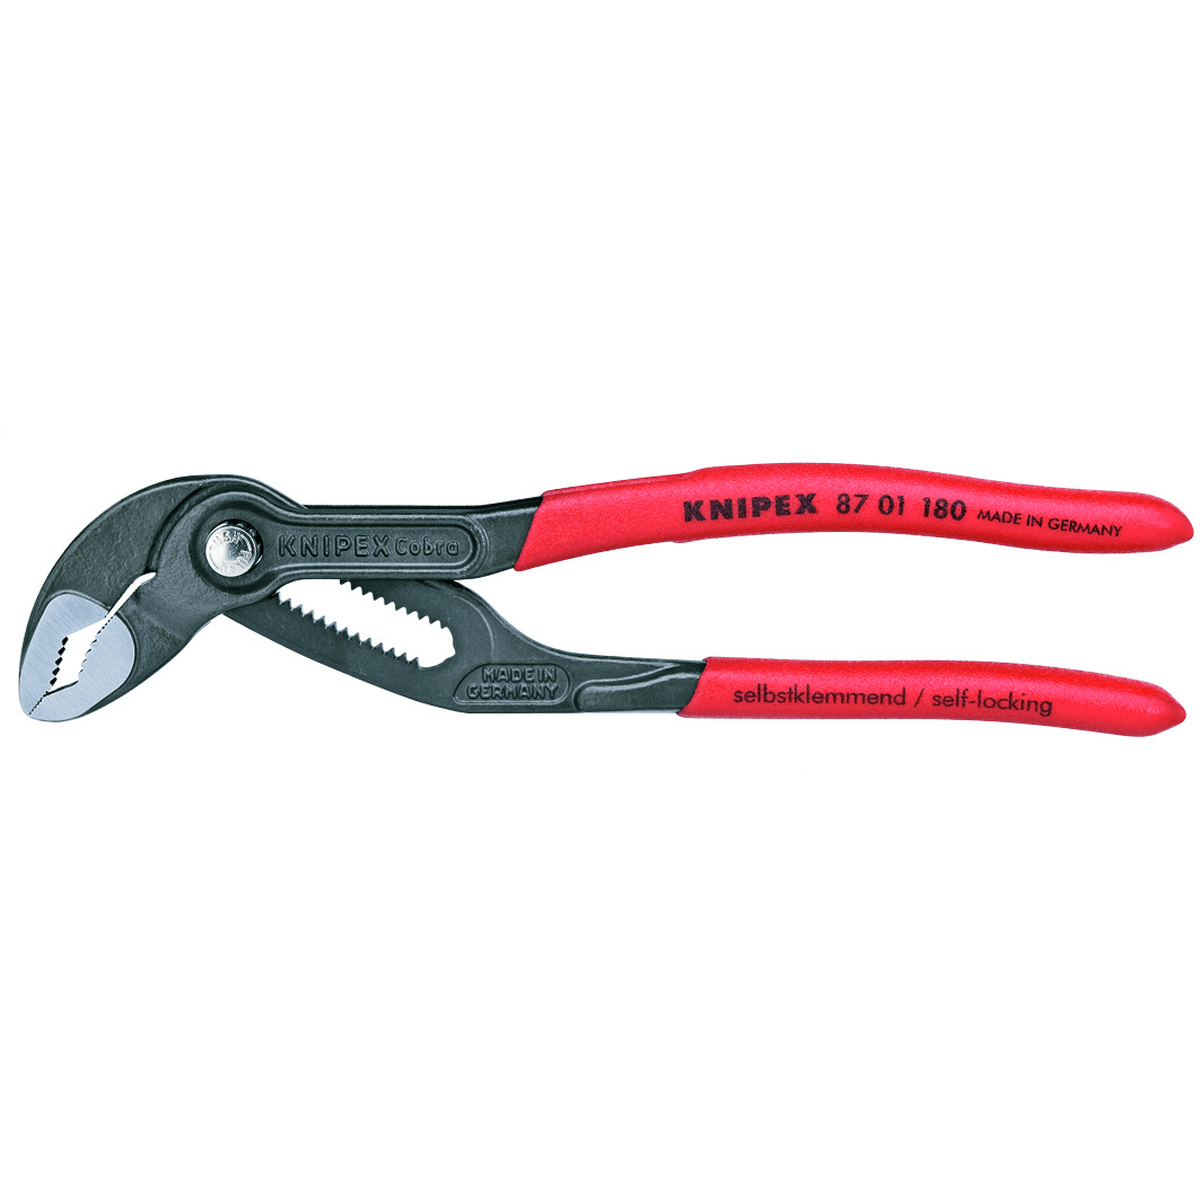 Knipex 8701180 - 7" Cobra Water Pump Pliers - wise-line-tools